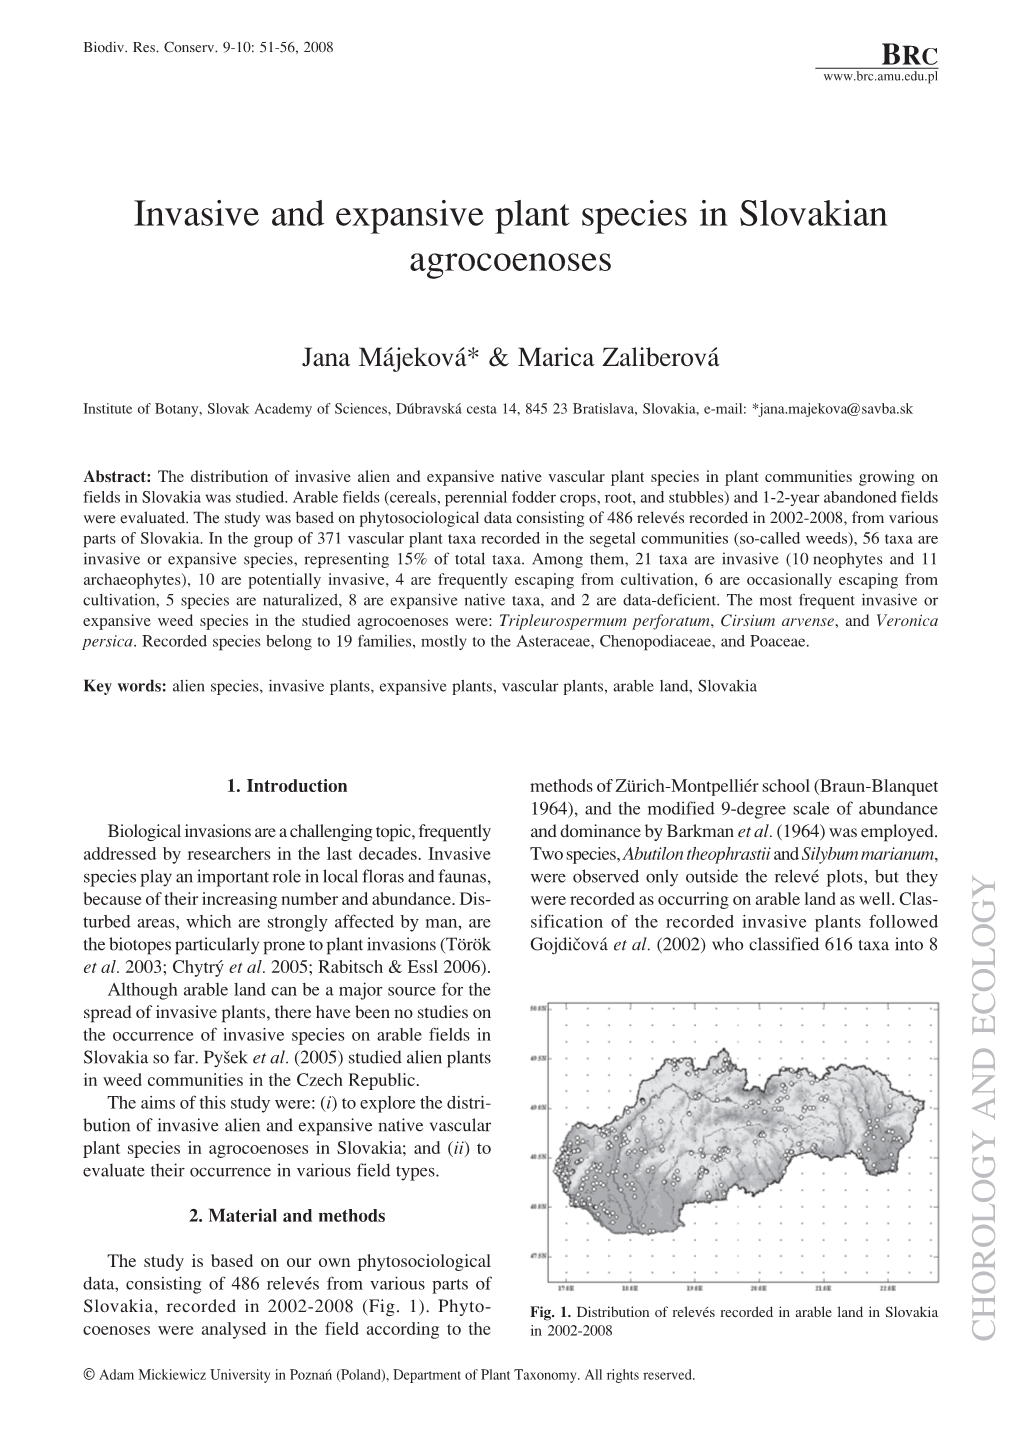 Invasive and Expansive Plant Species in Slovakian Agrocoenoses